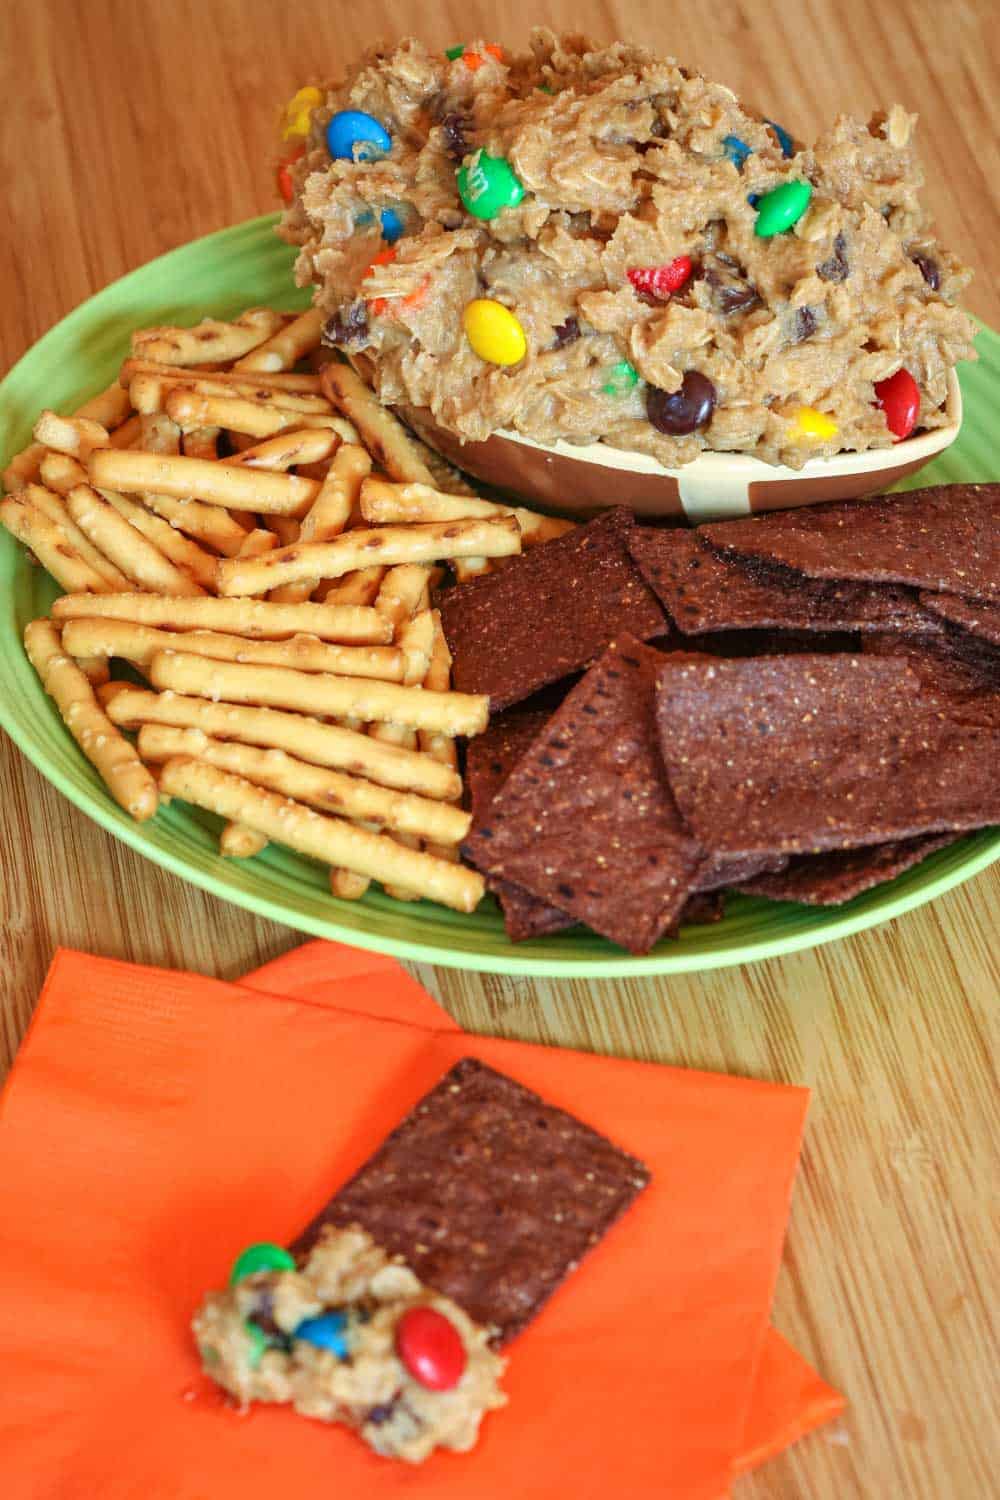 A grene plate with a bowl of cookie dough dip, pretzels, and chips.